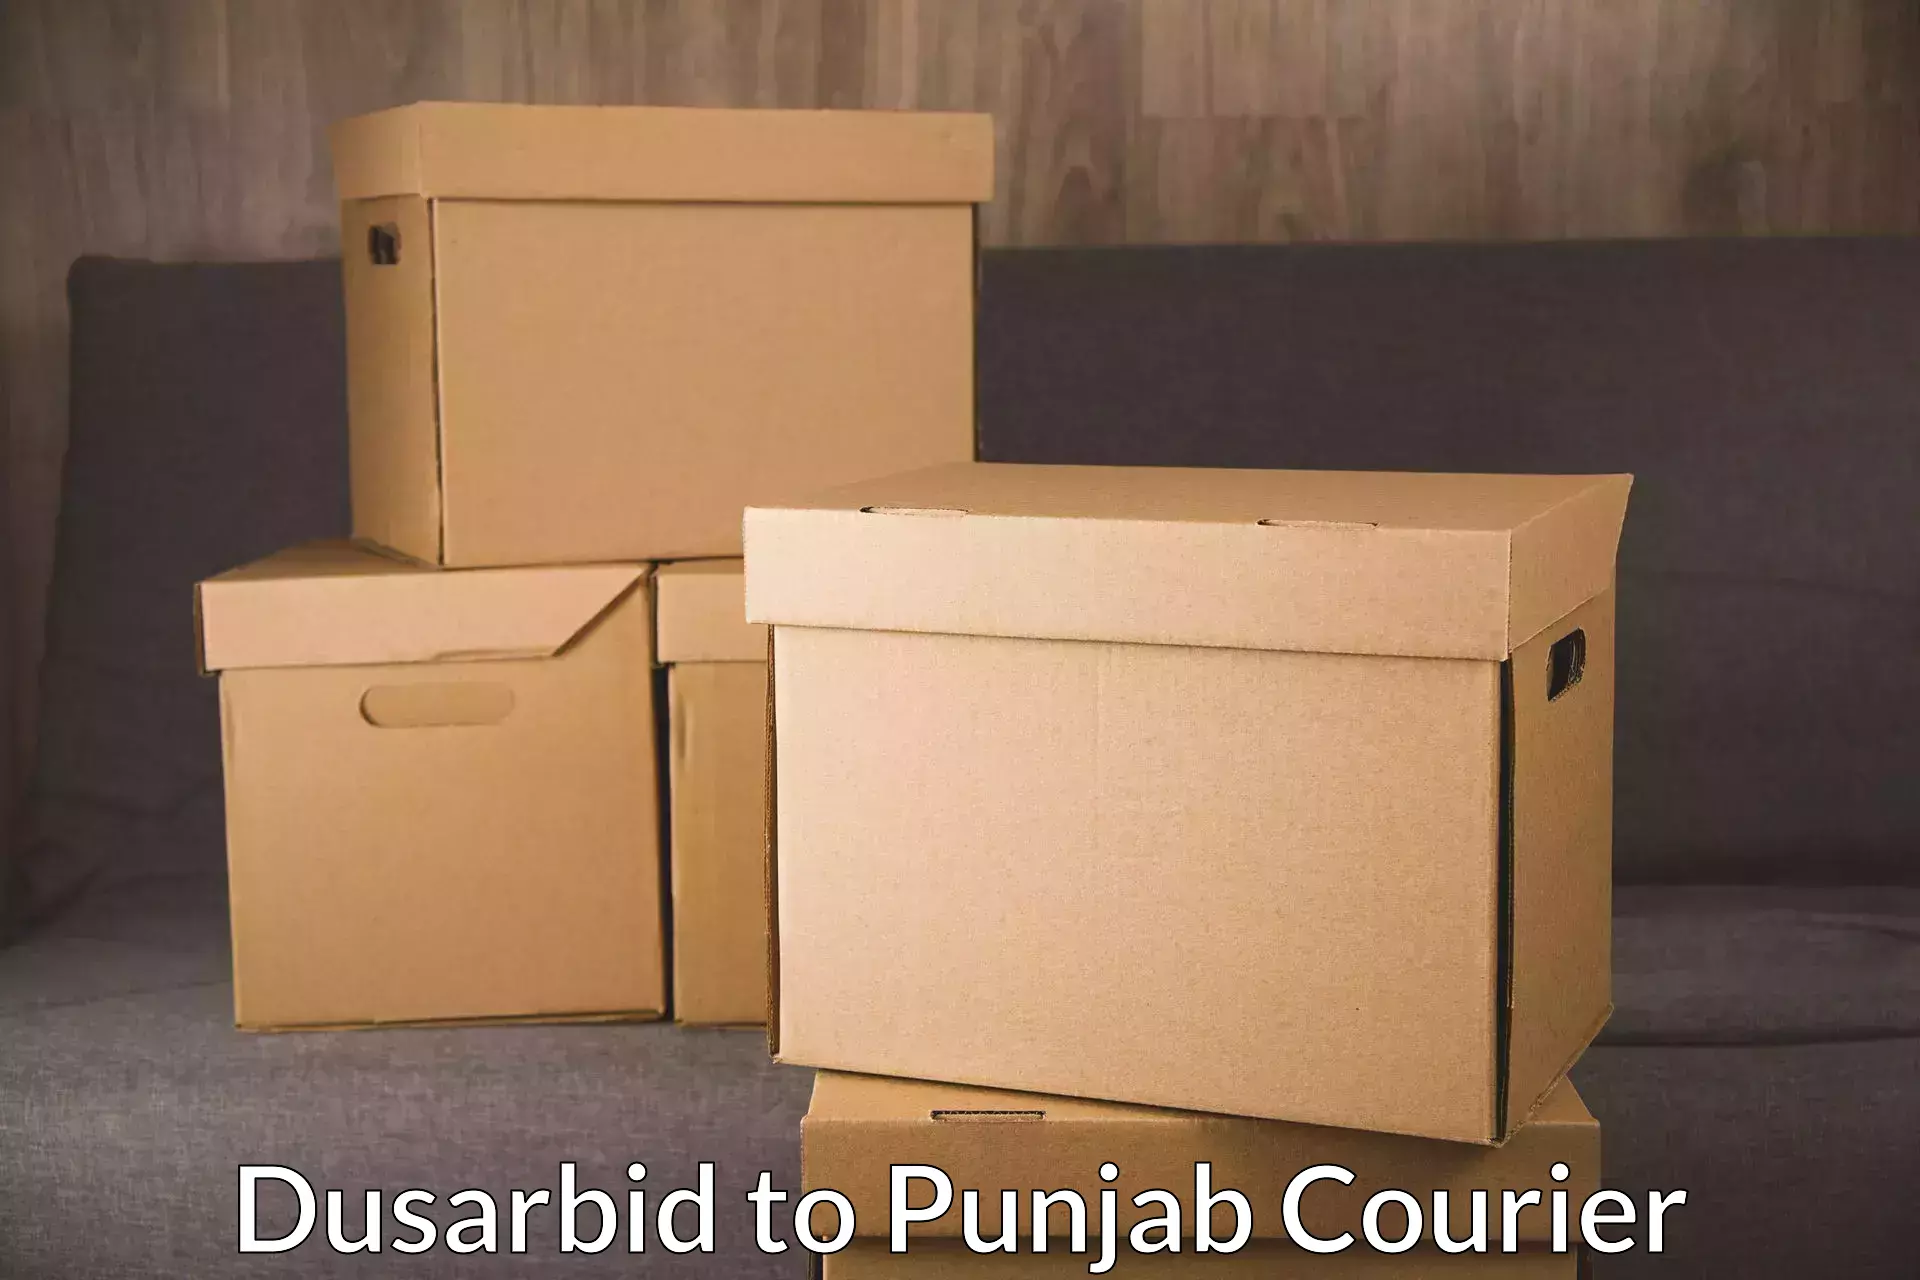 Tailored shipping plans Dusarbid to Sirhind Fatehgarh